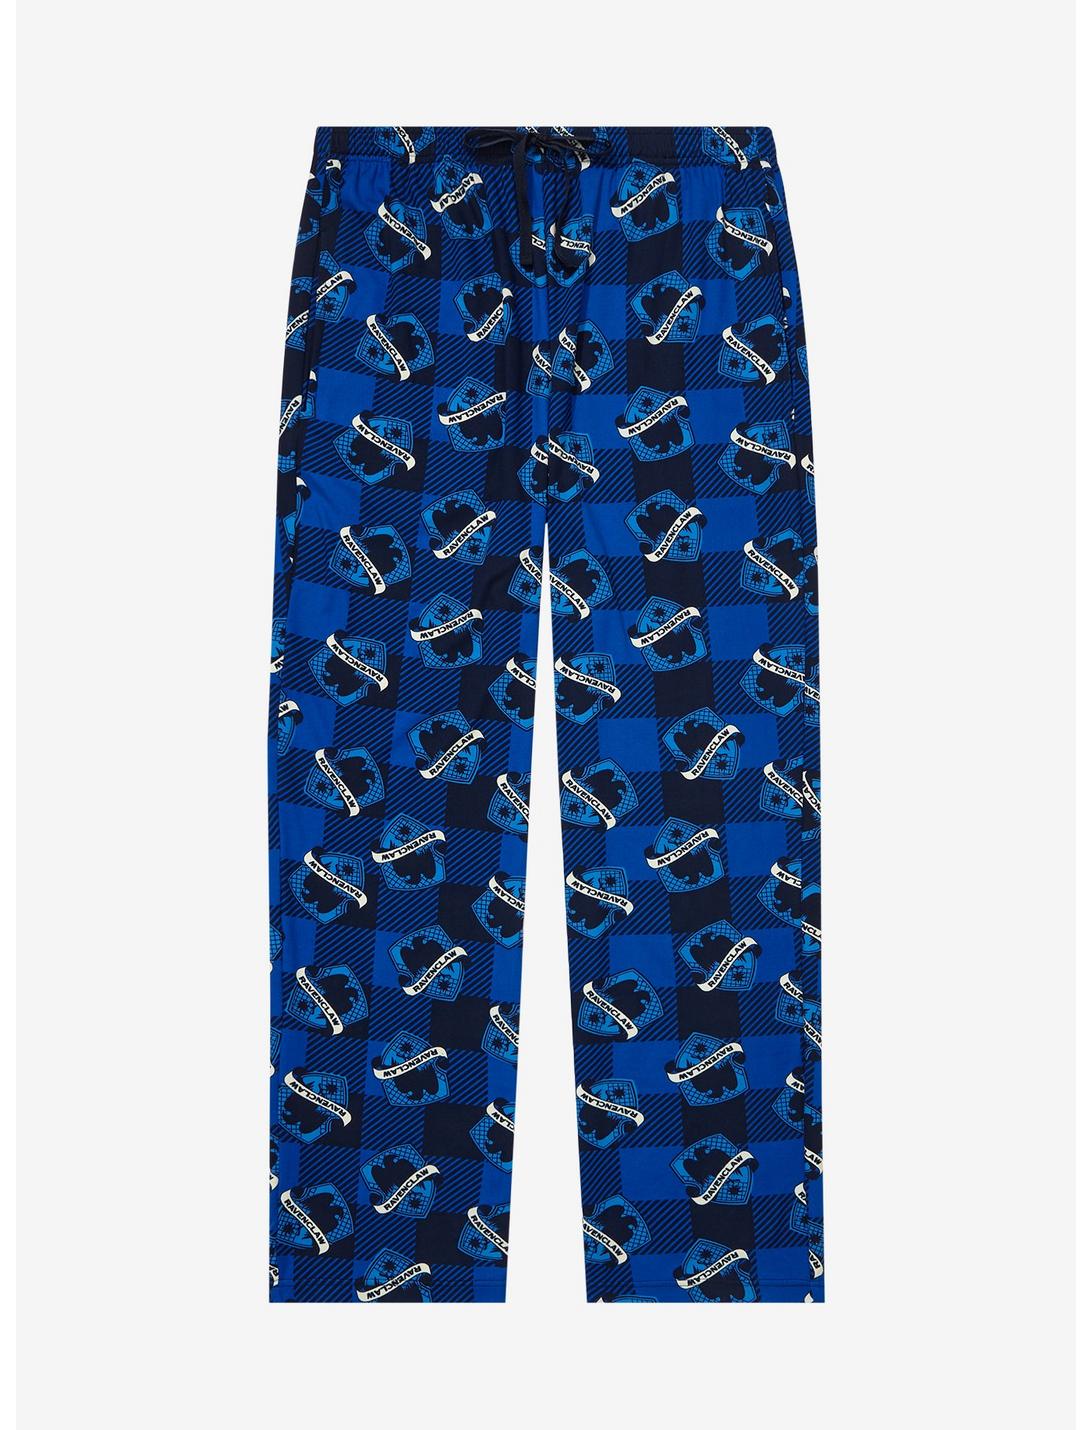 Harry Potter Plaid Ravenclaw Allover Print Sleep Pants - BoxLunch Exclusive, BLUE, hi-res